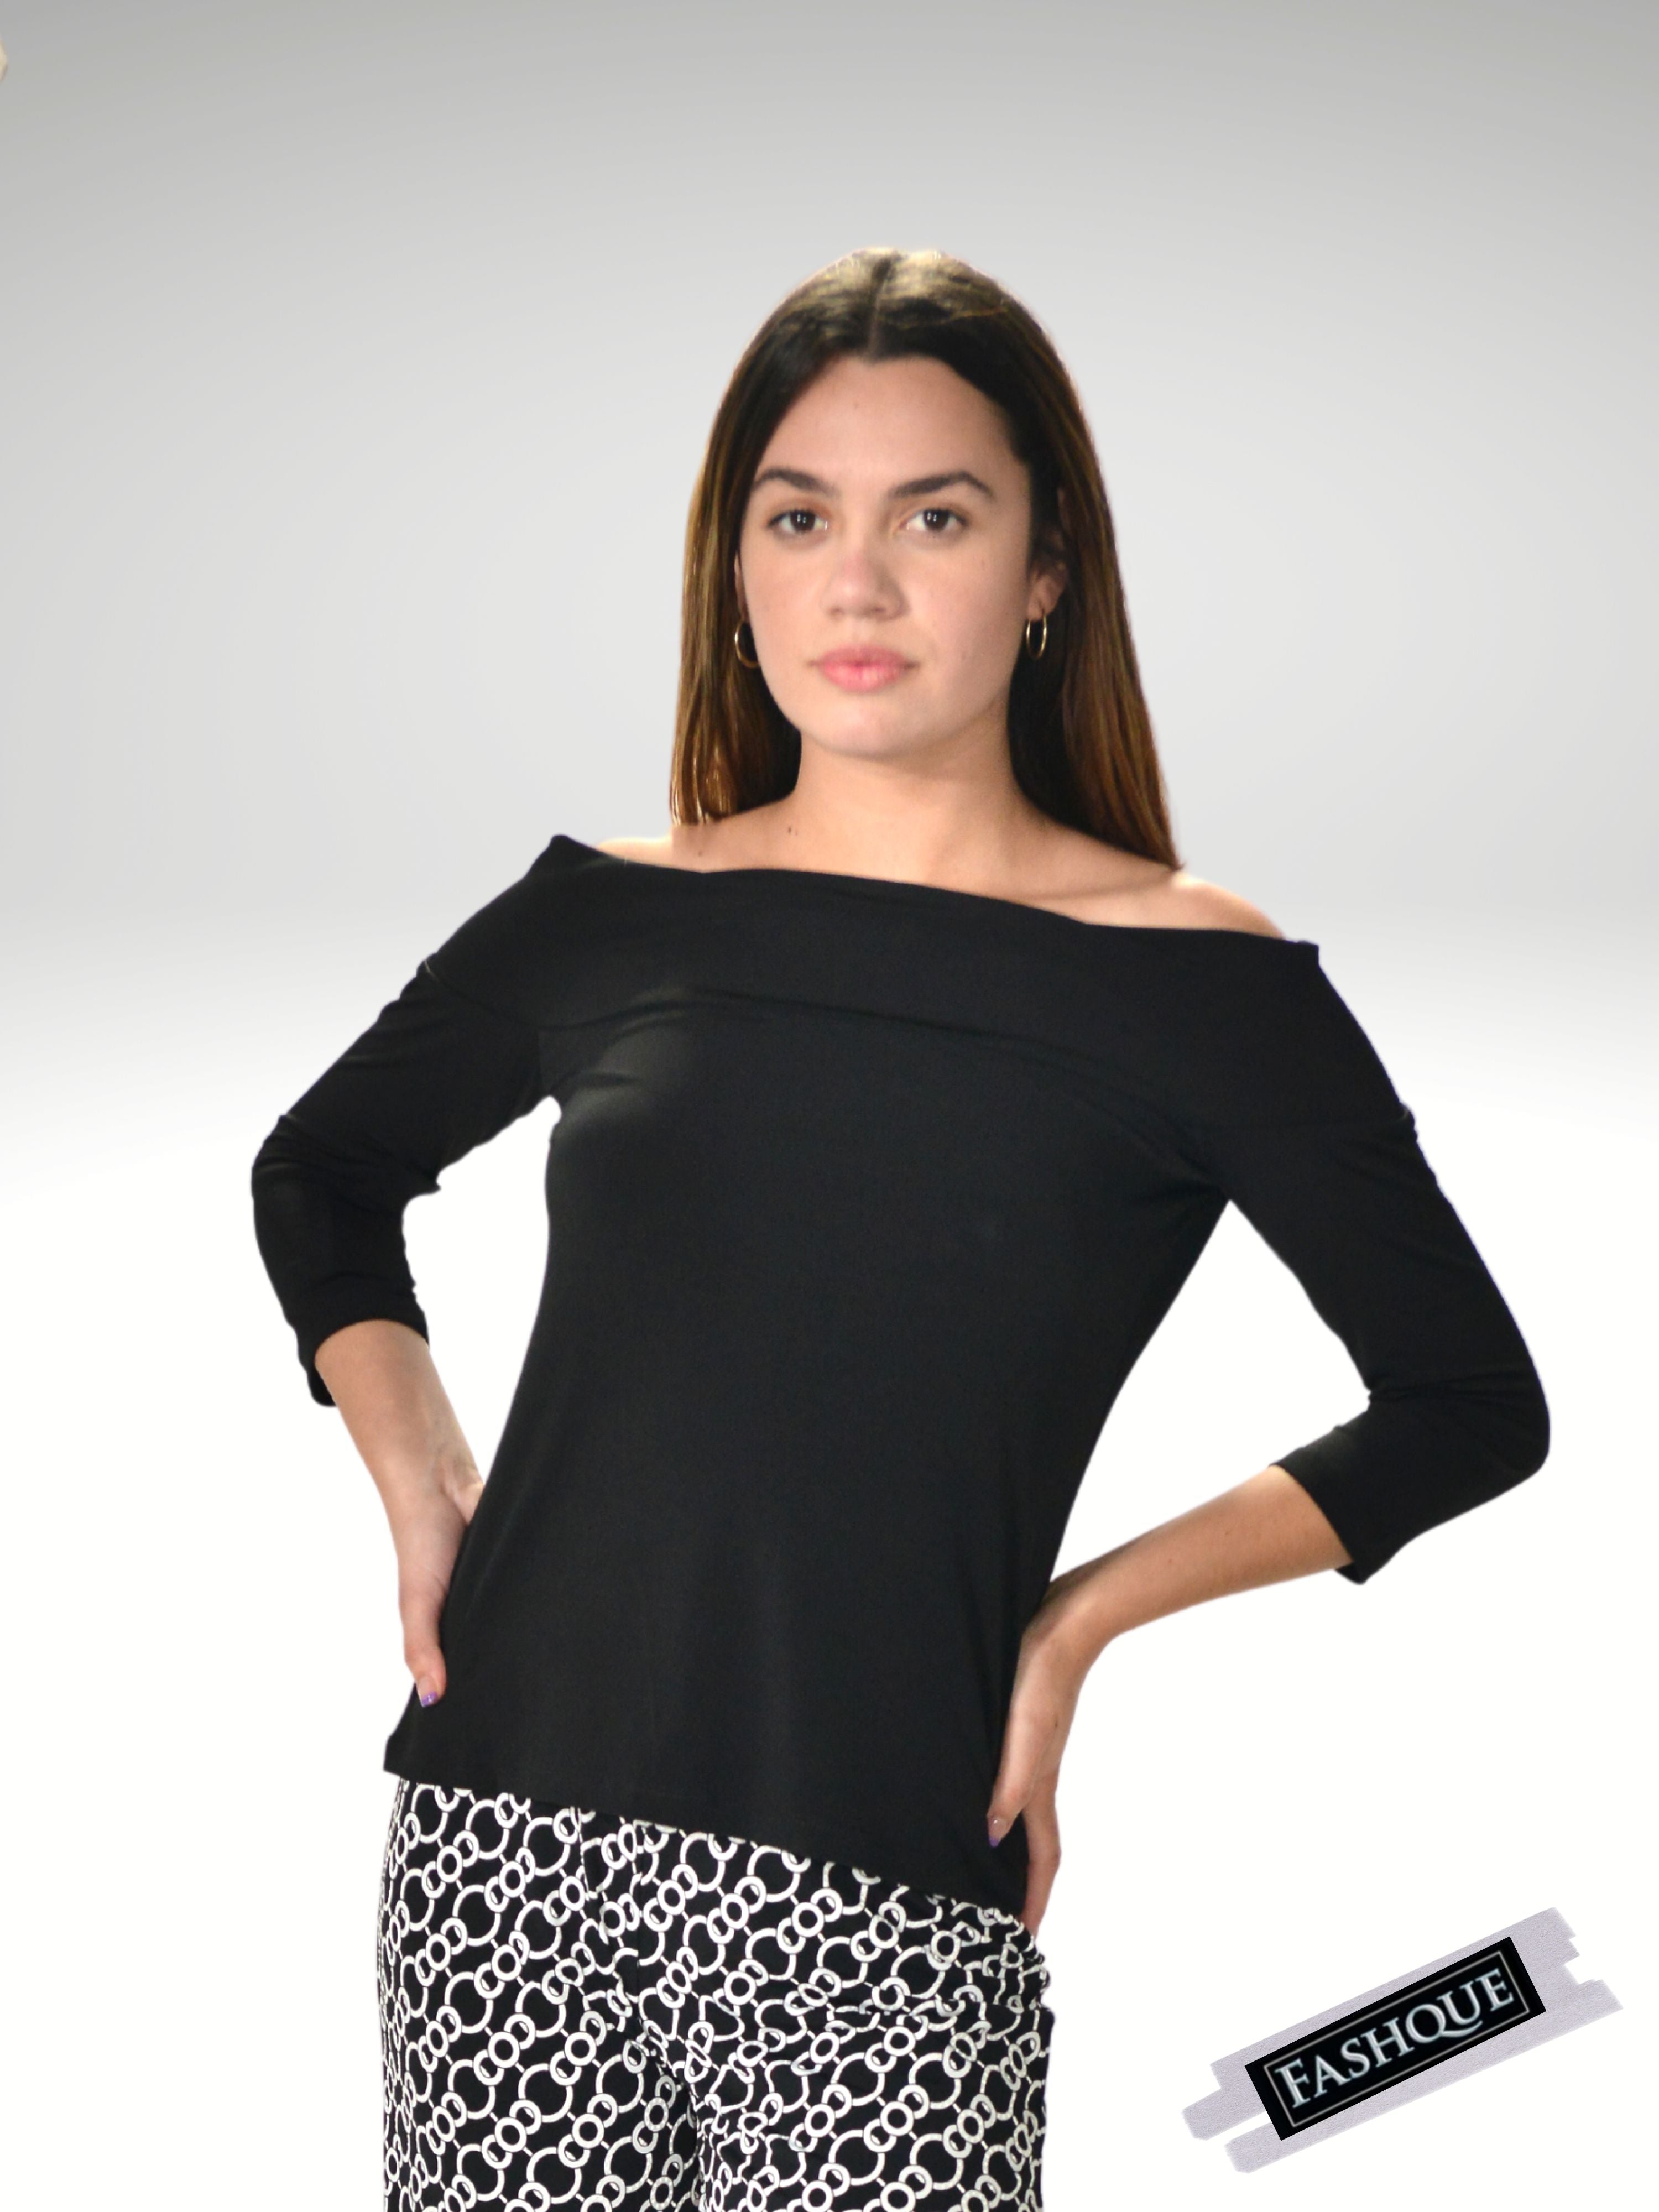 FASHQUE - Off Shoulder top with 3/4 Sleeves - T495 SALE